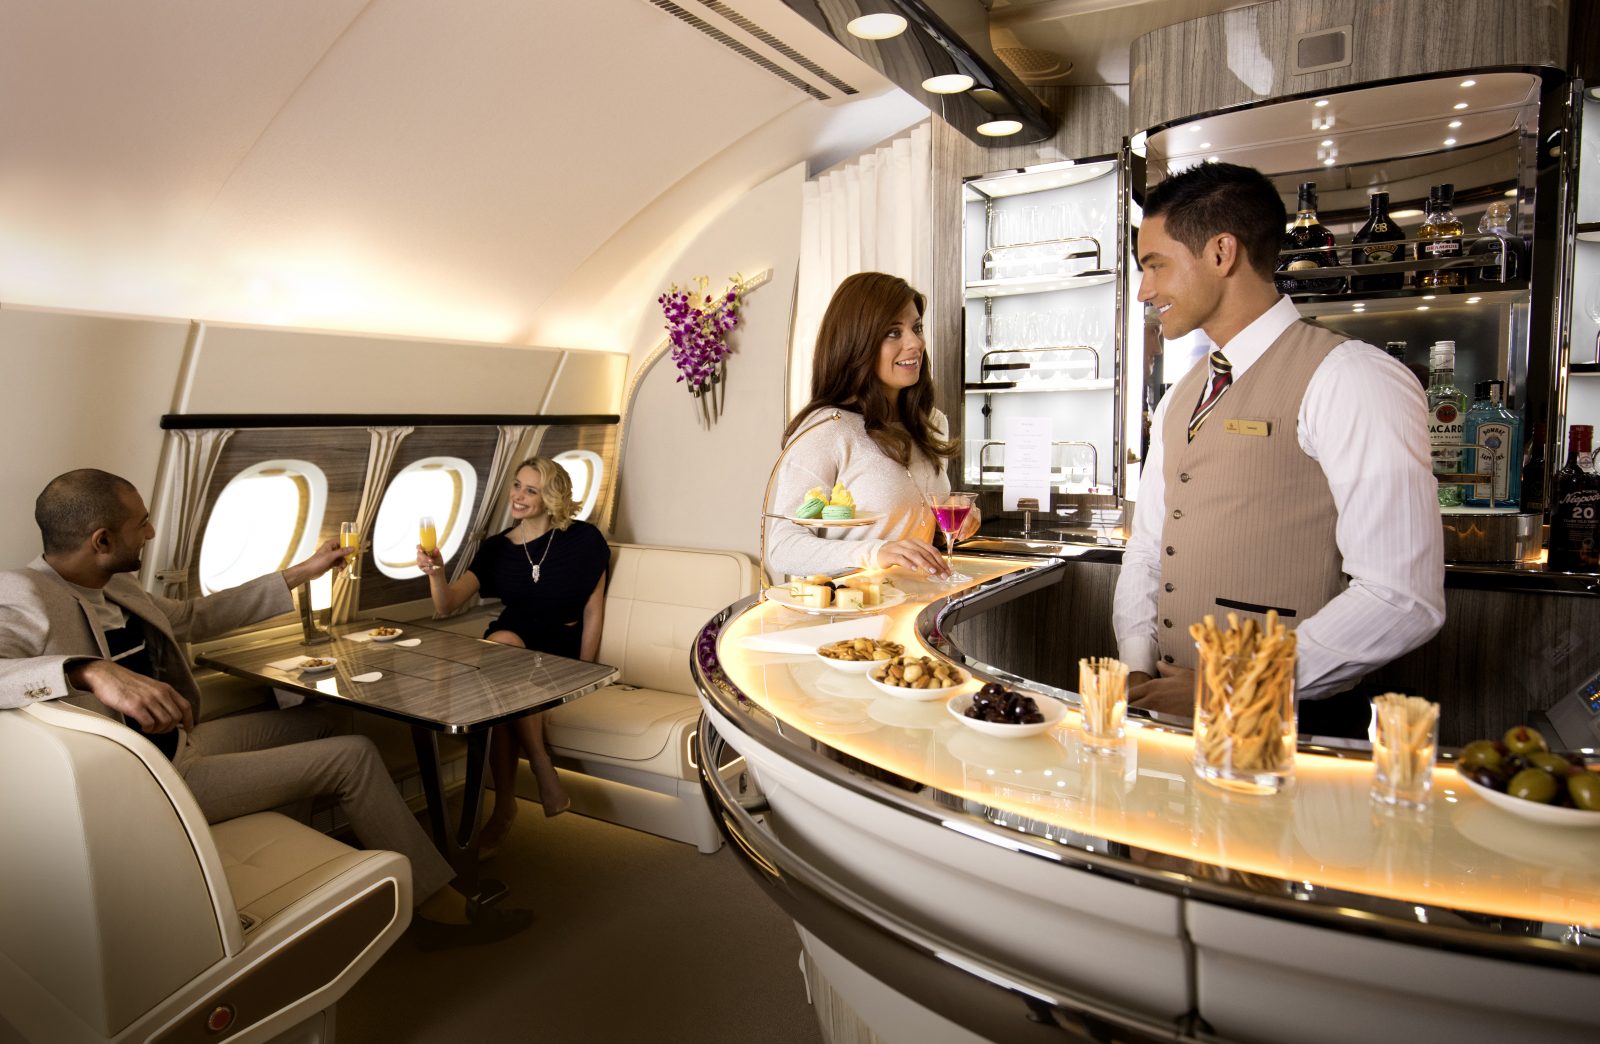 Emirates has unveiled an even more luxurious onboard bar and lounge for its A380 aircraft